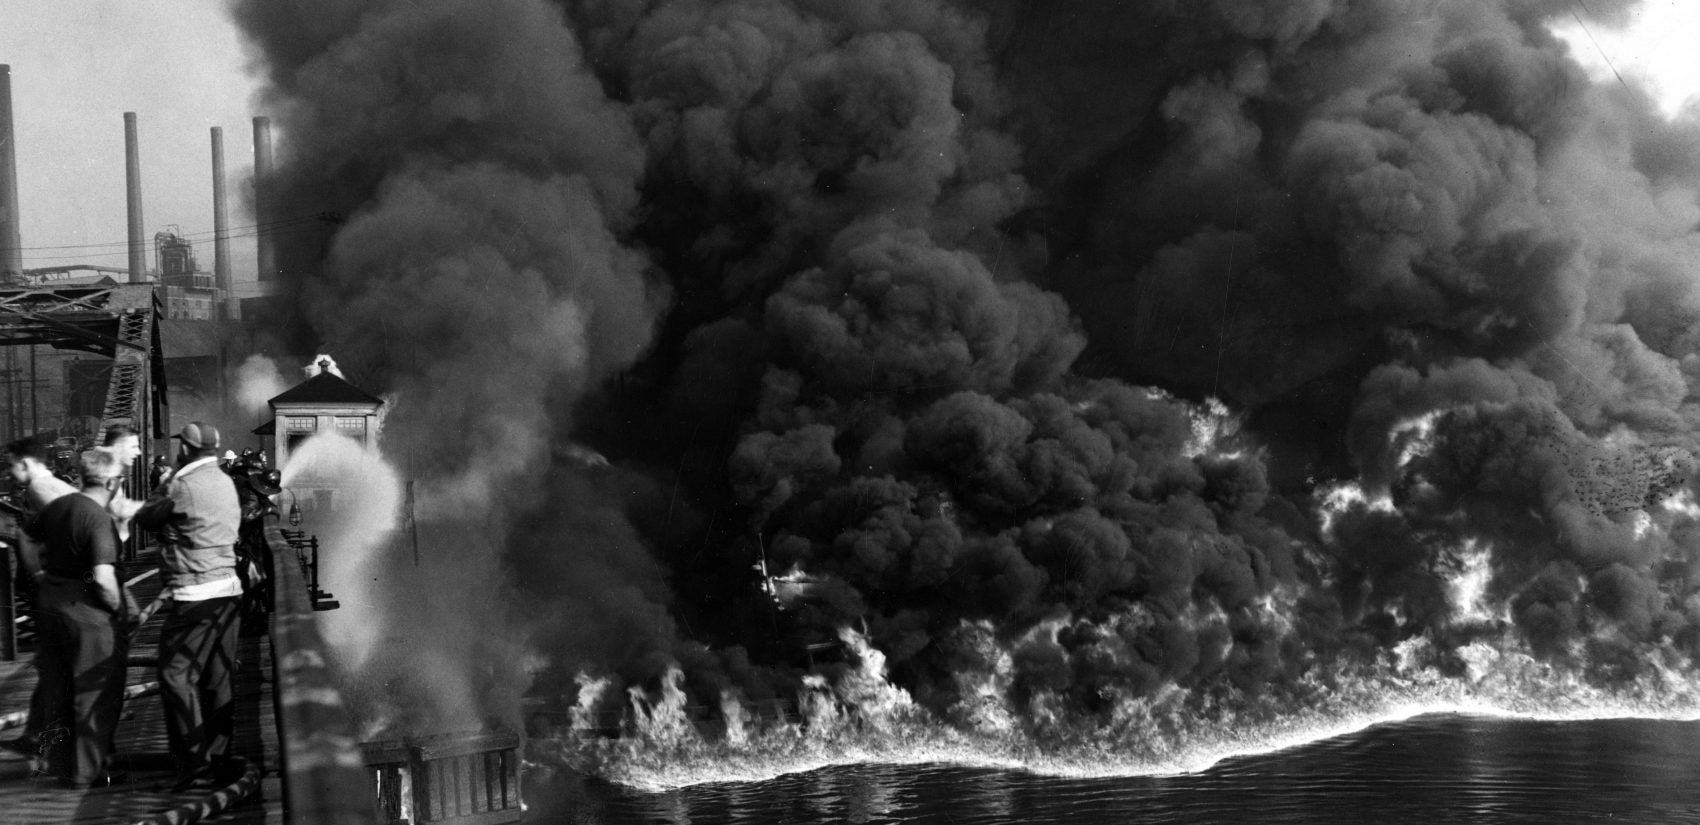 Fire on the Cuyahoga River, 1952. Many such fires occurred on the river before the Clean Water Act. (The Cleveland Press Collection, Michael Schwartz Library, Cleveland State University)